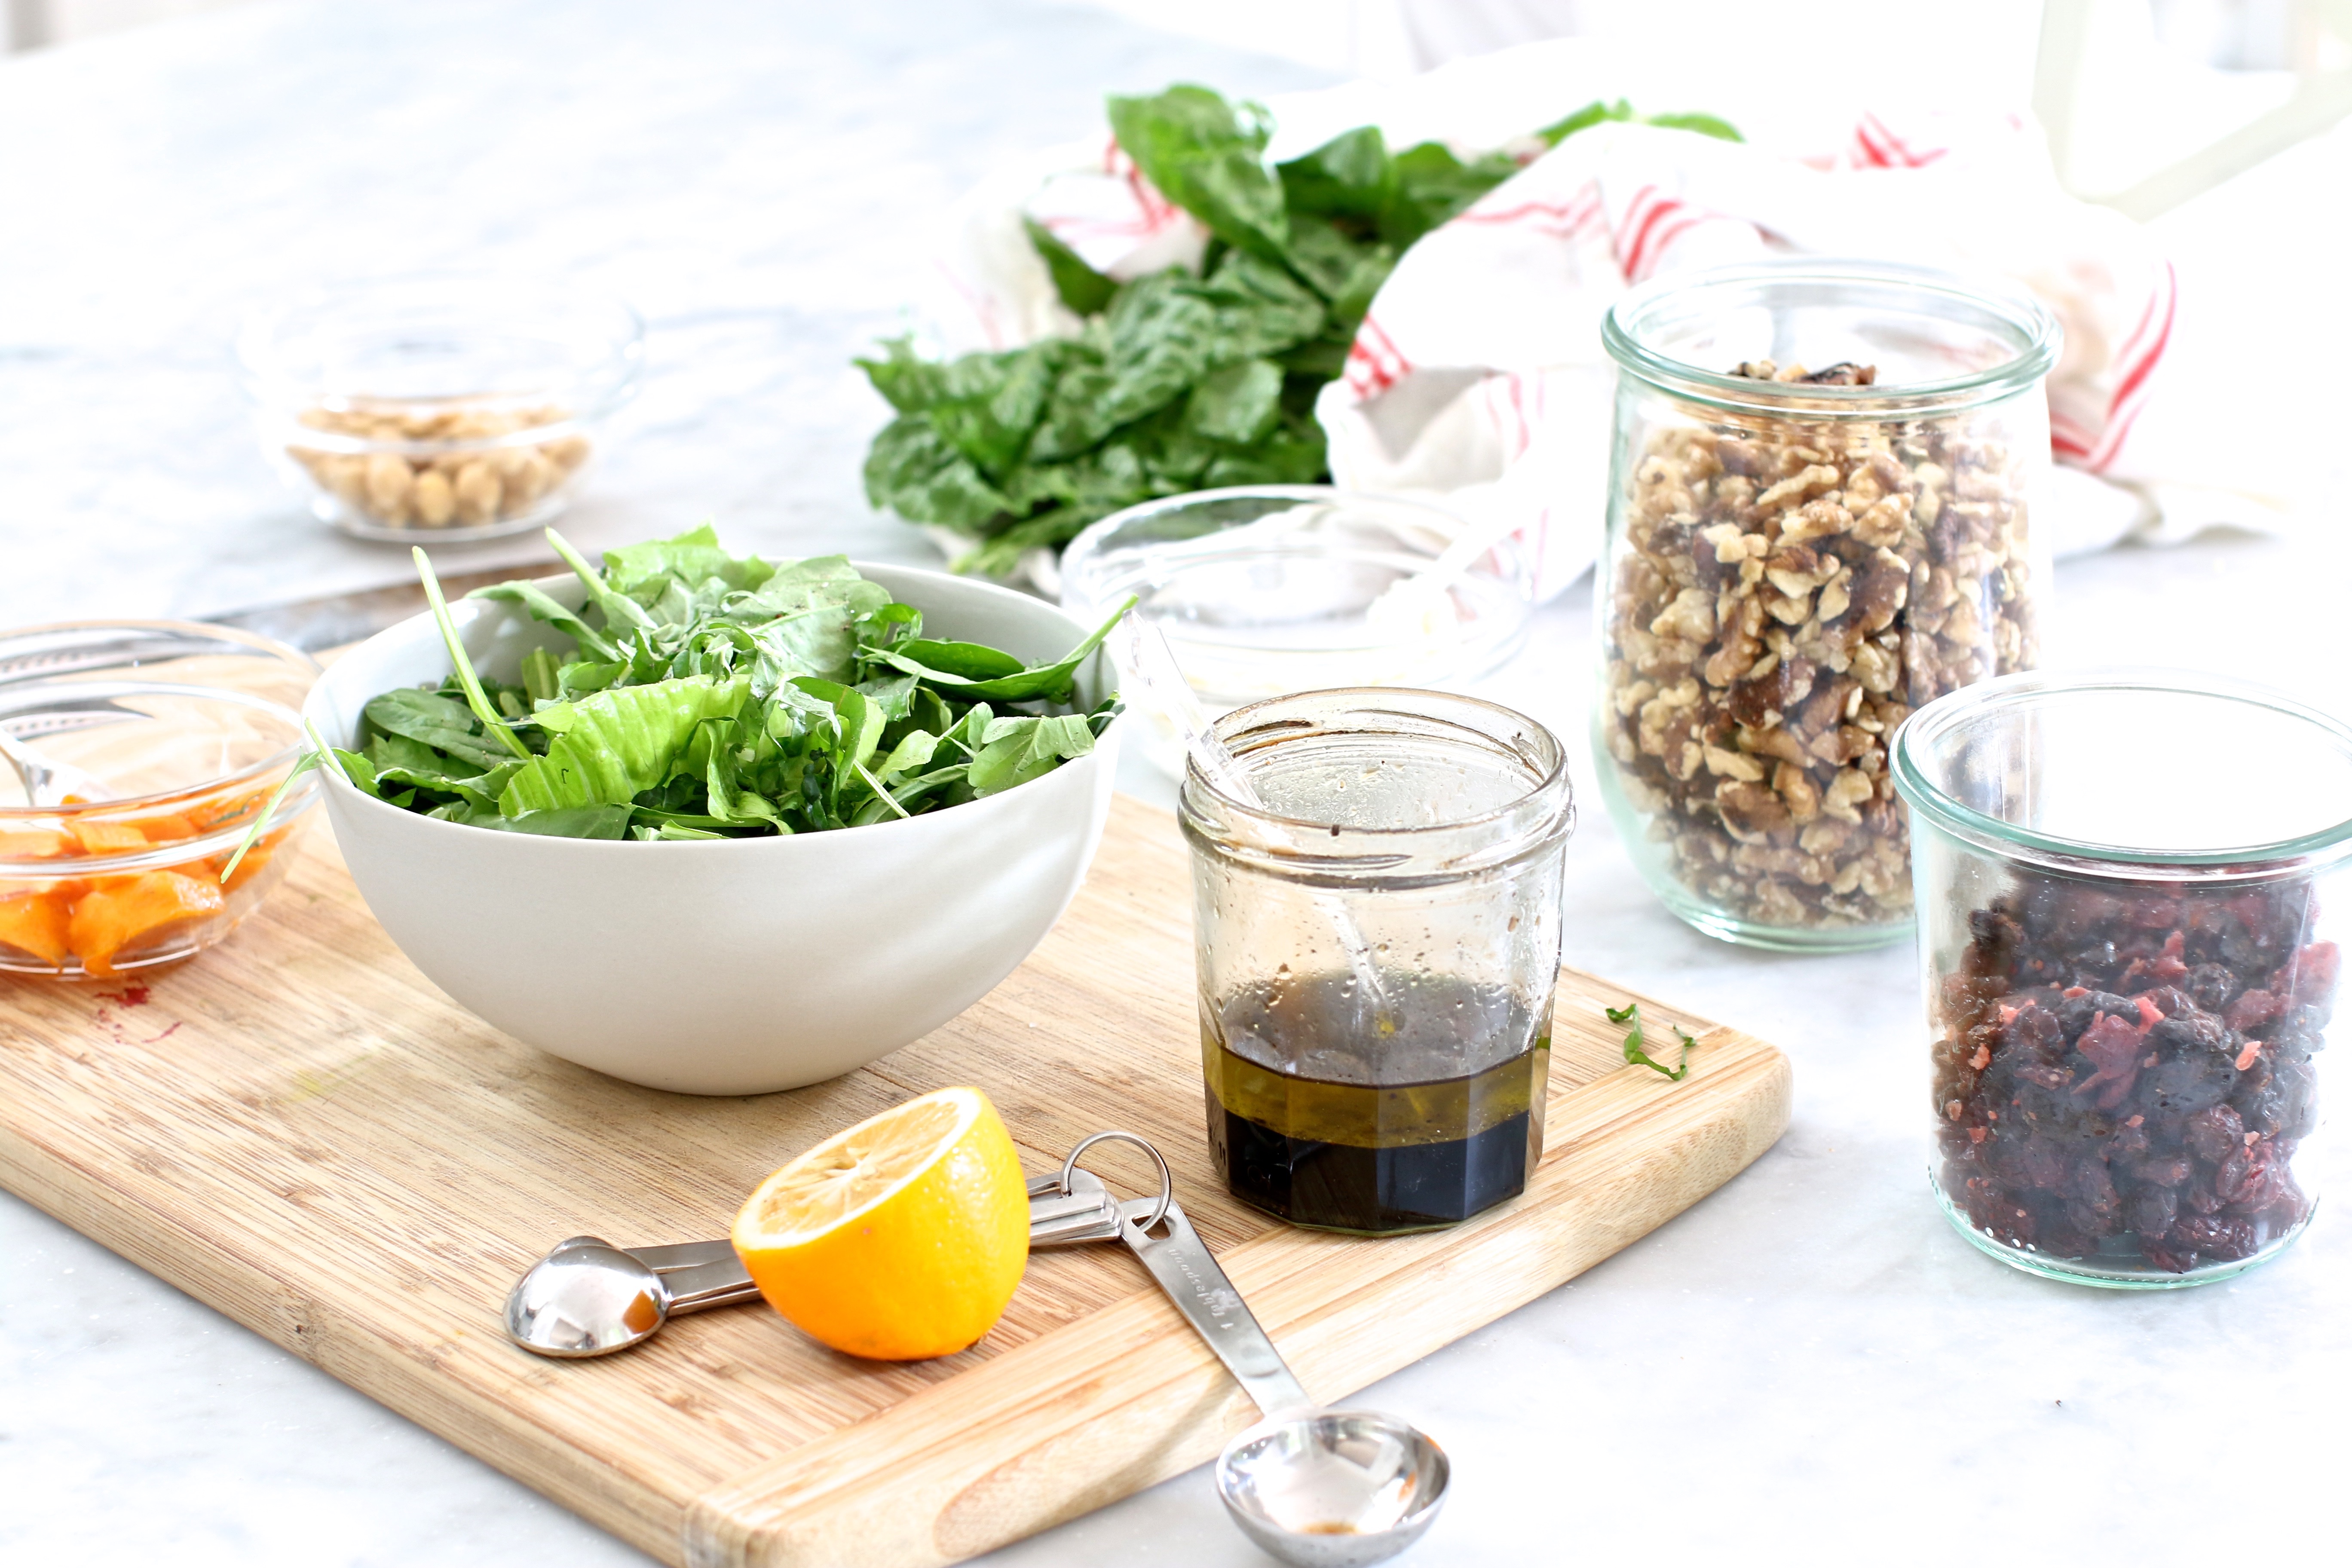 the makings of a great salad | Greensgirl Nutrition